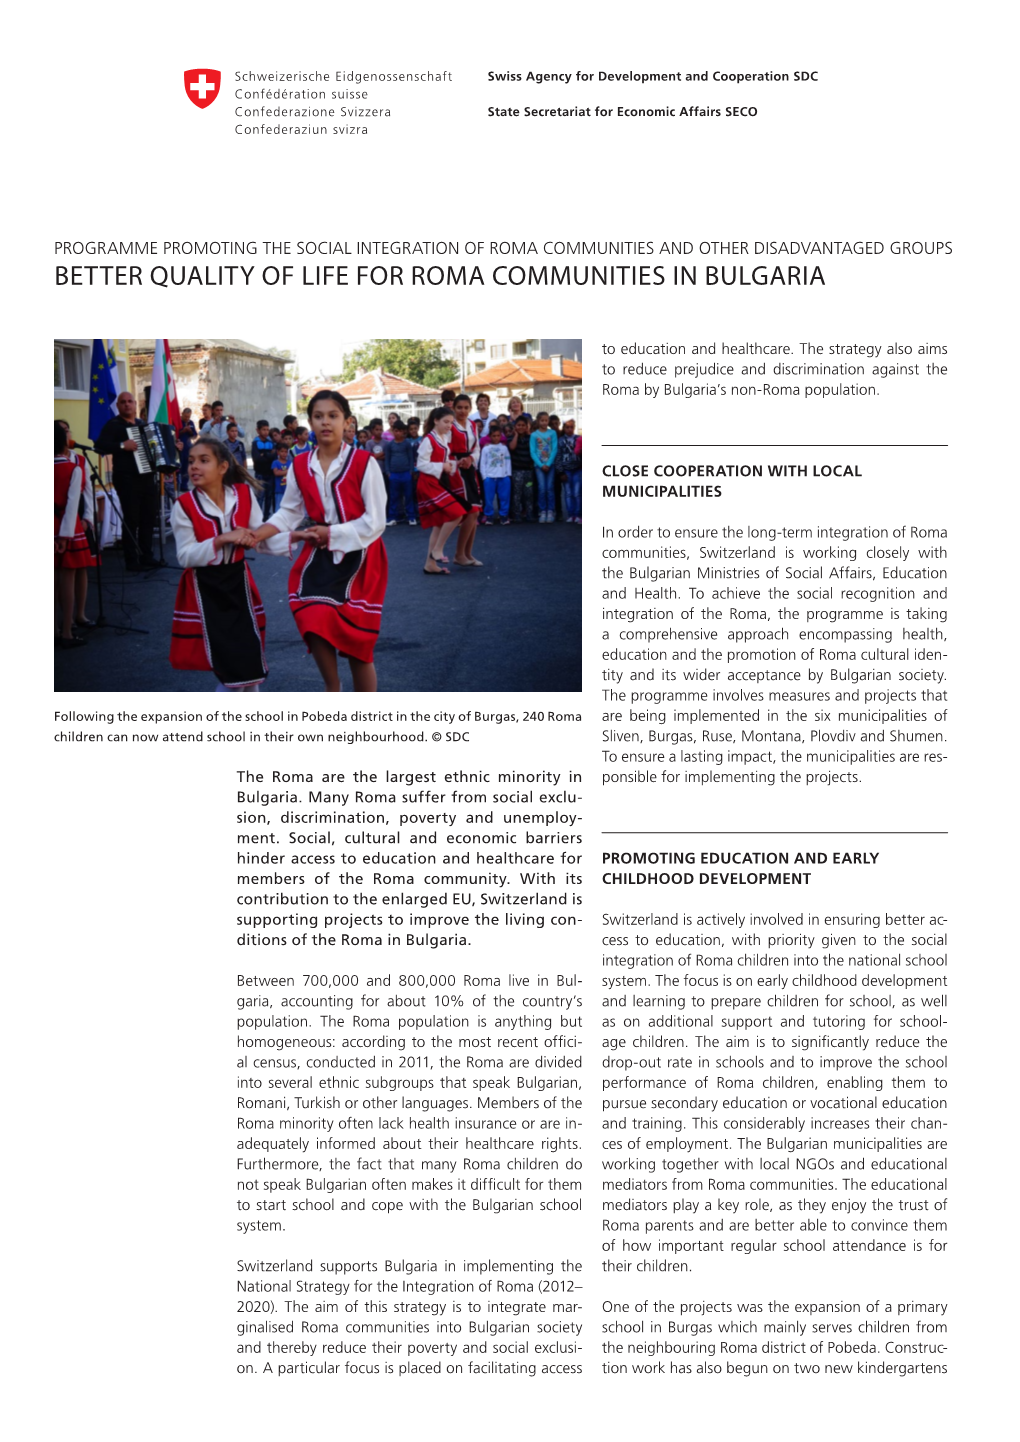 Better Quality of Life for Roma Communities in Bulgaria